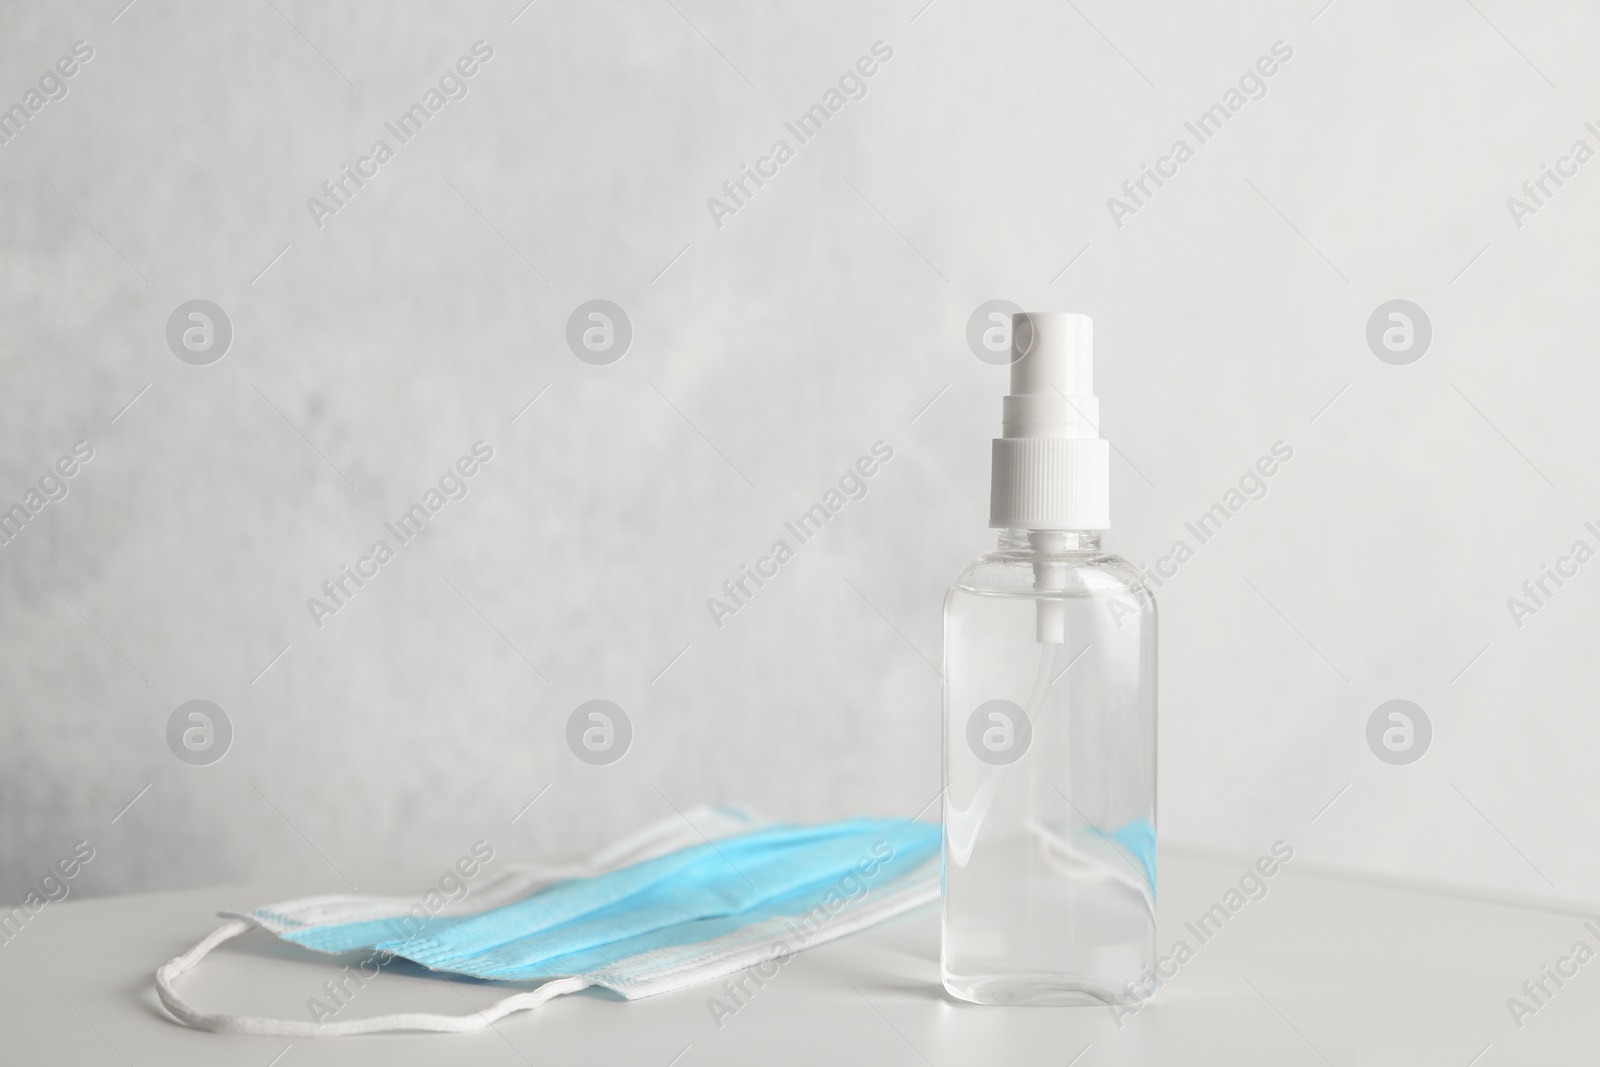 Photo of Antiseptic spray and protective mask on table against light background. Protection from virus